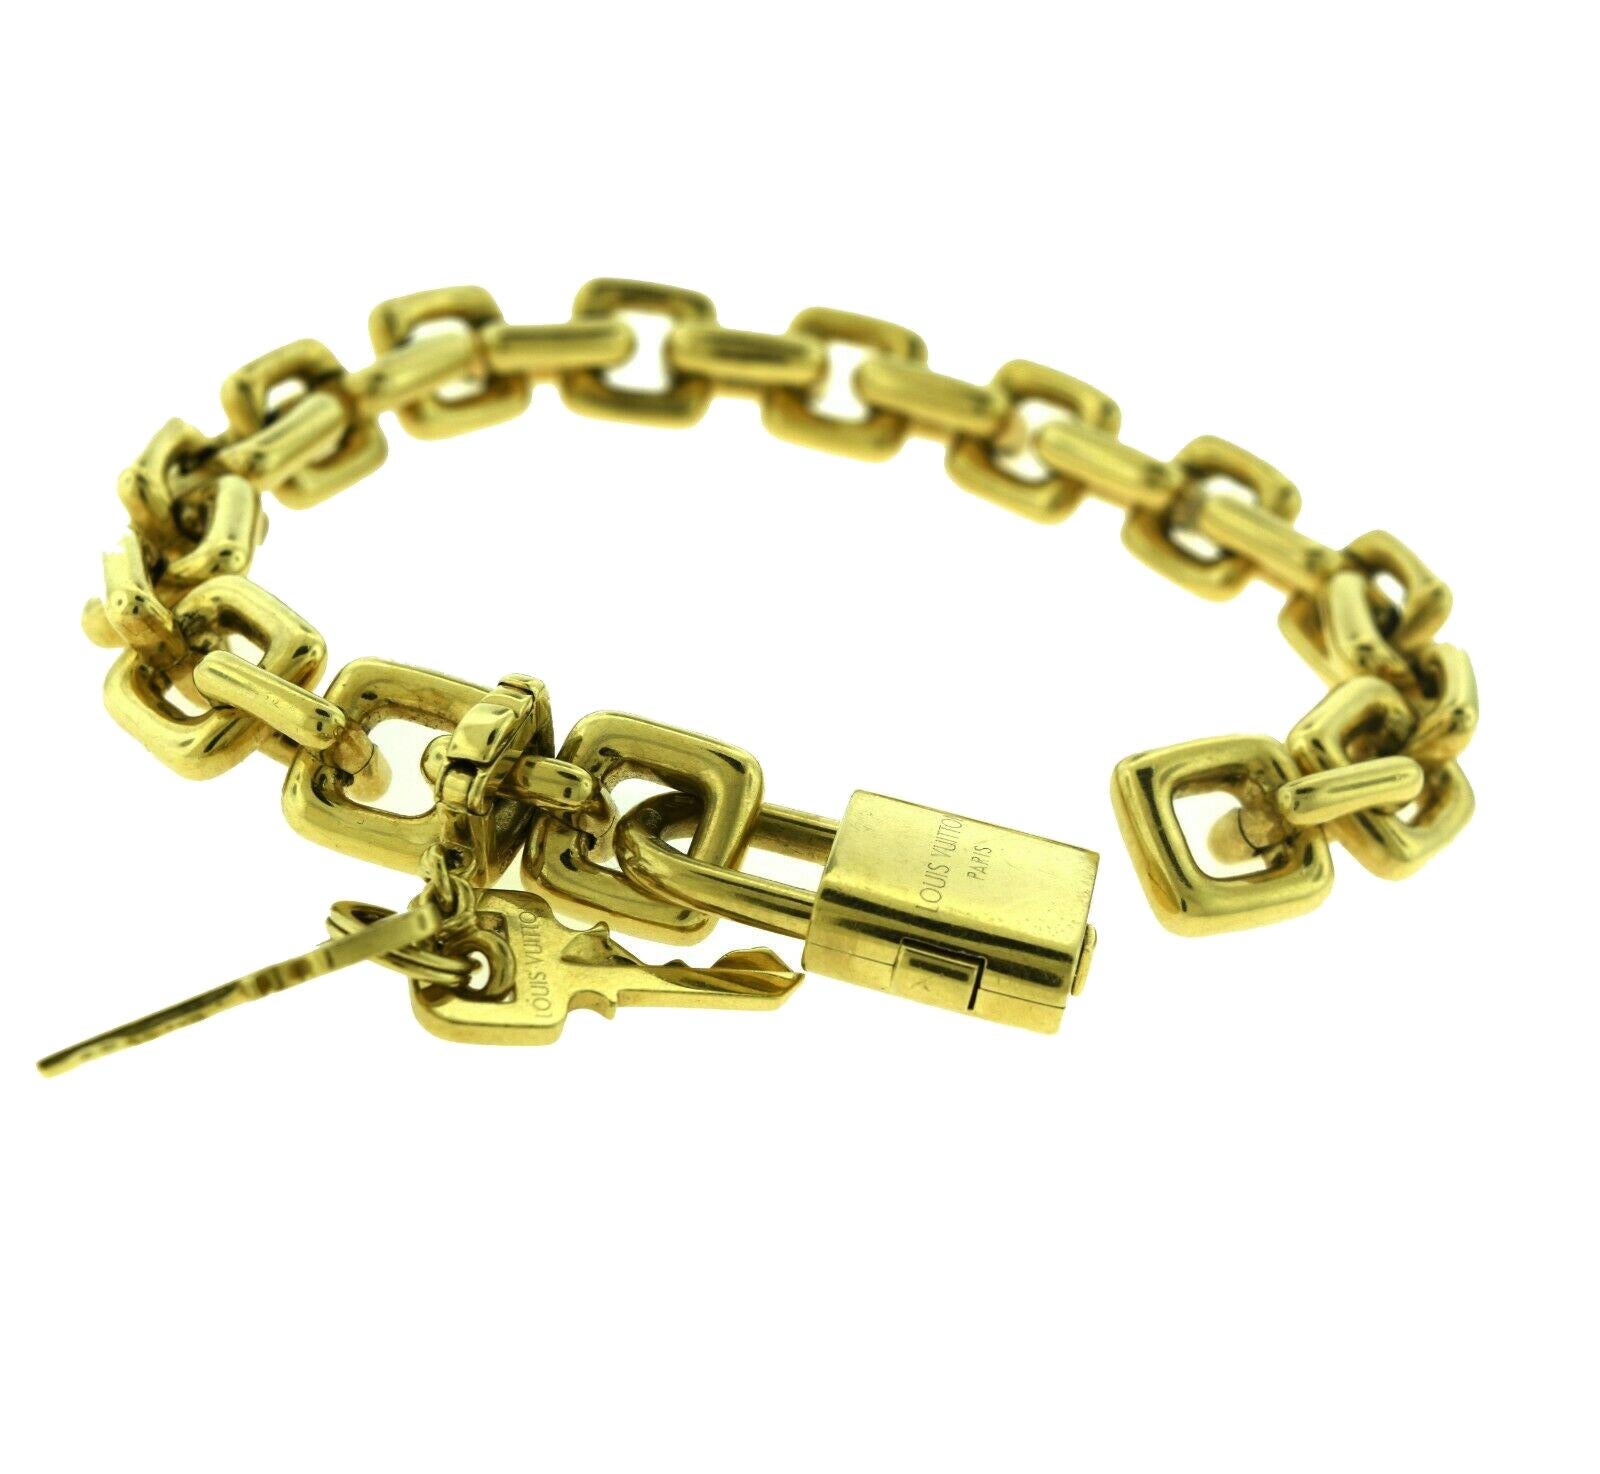 Brilliance Jewels, Miami
Questions? Call Us Anytime!
786,482,8100

Designer: Louis Vuitton

Style: Square Link 

Metal: Yellow Gold

Metal Purity: 18k

Bracelet Length: 7.50 in

Bracelet Width: 0.35 in

Total Item Weight (grams): 96 grams

Hallmark: